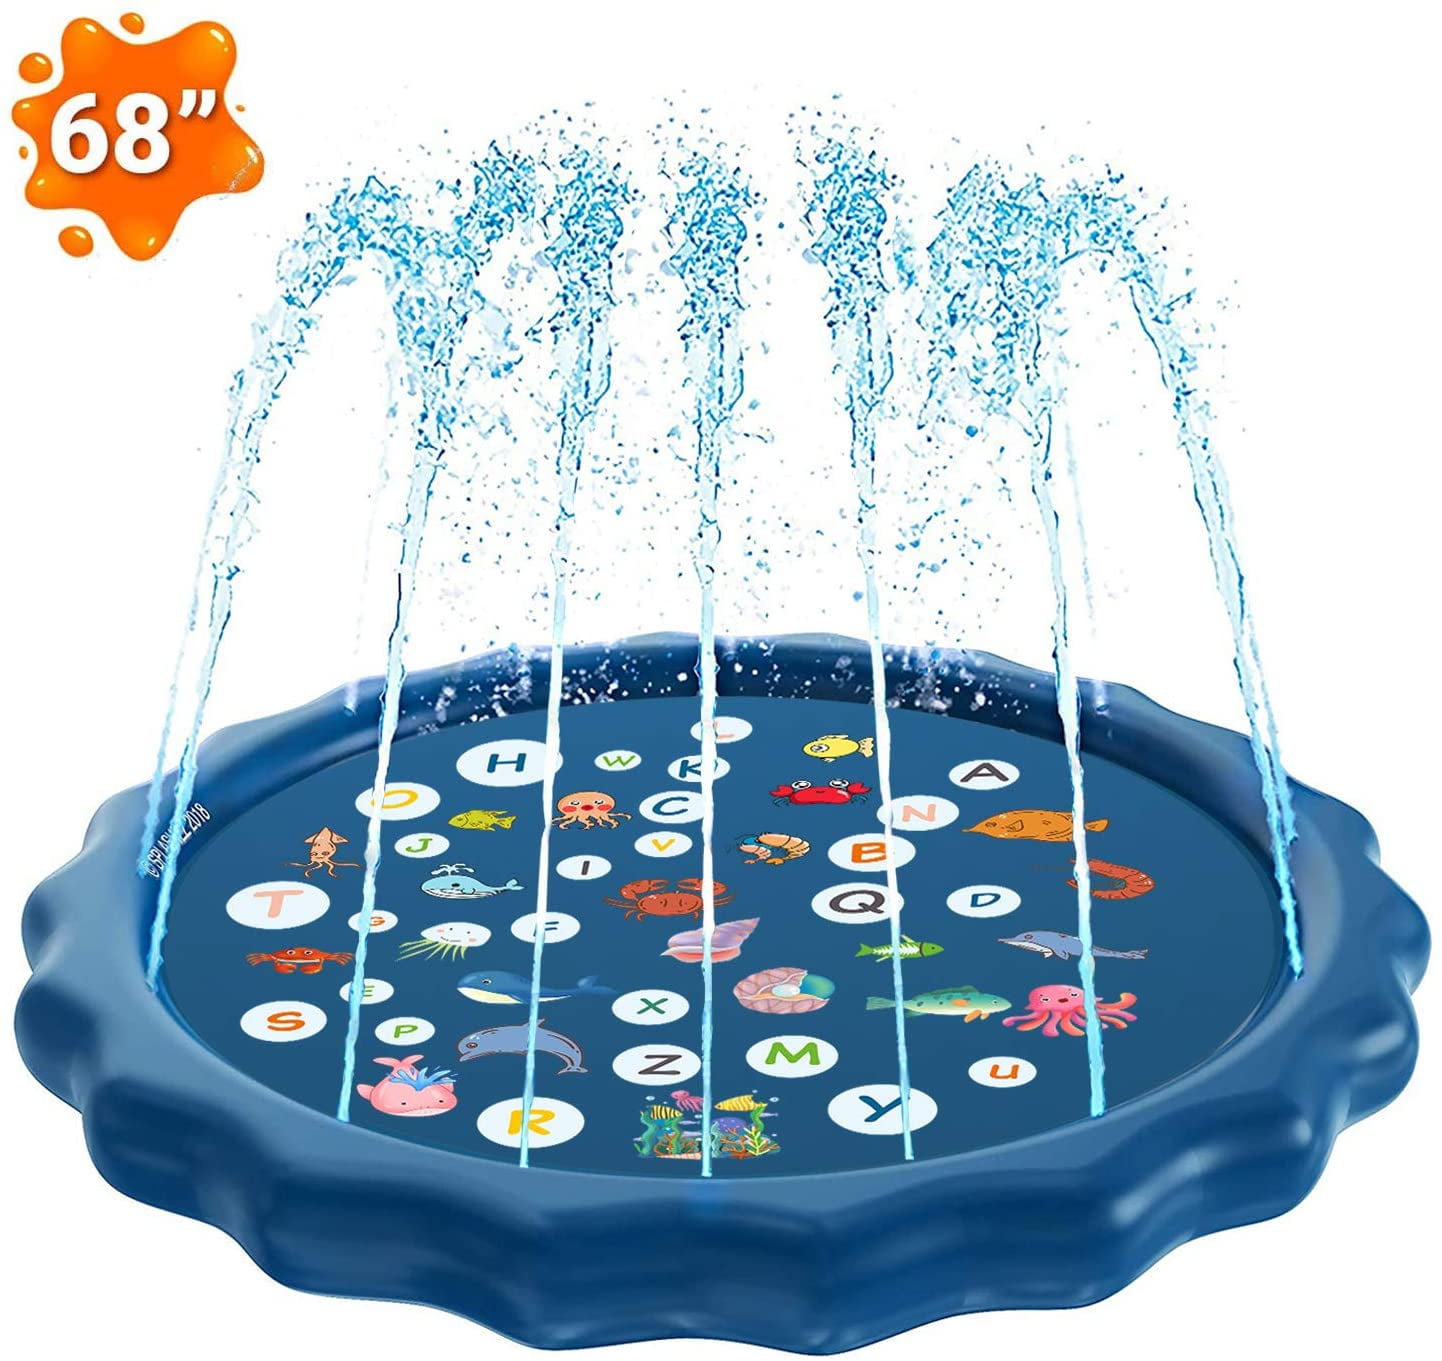 TOYANDONA PVC Water Sprinkler Pad Play Mat Summer Essential Spray Toys Water Playing Spray Toy for Outdoor Pool Garden Park 170cm